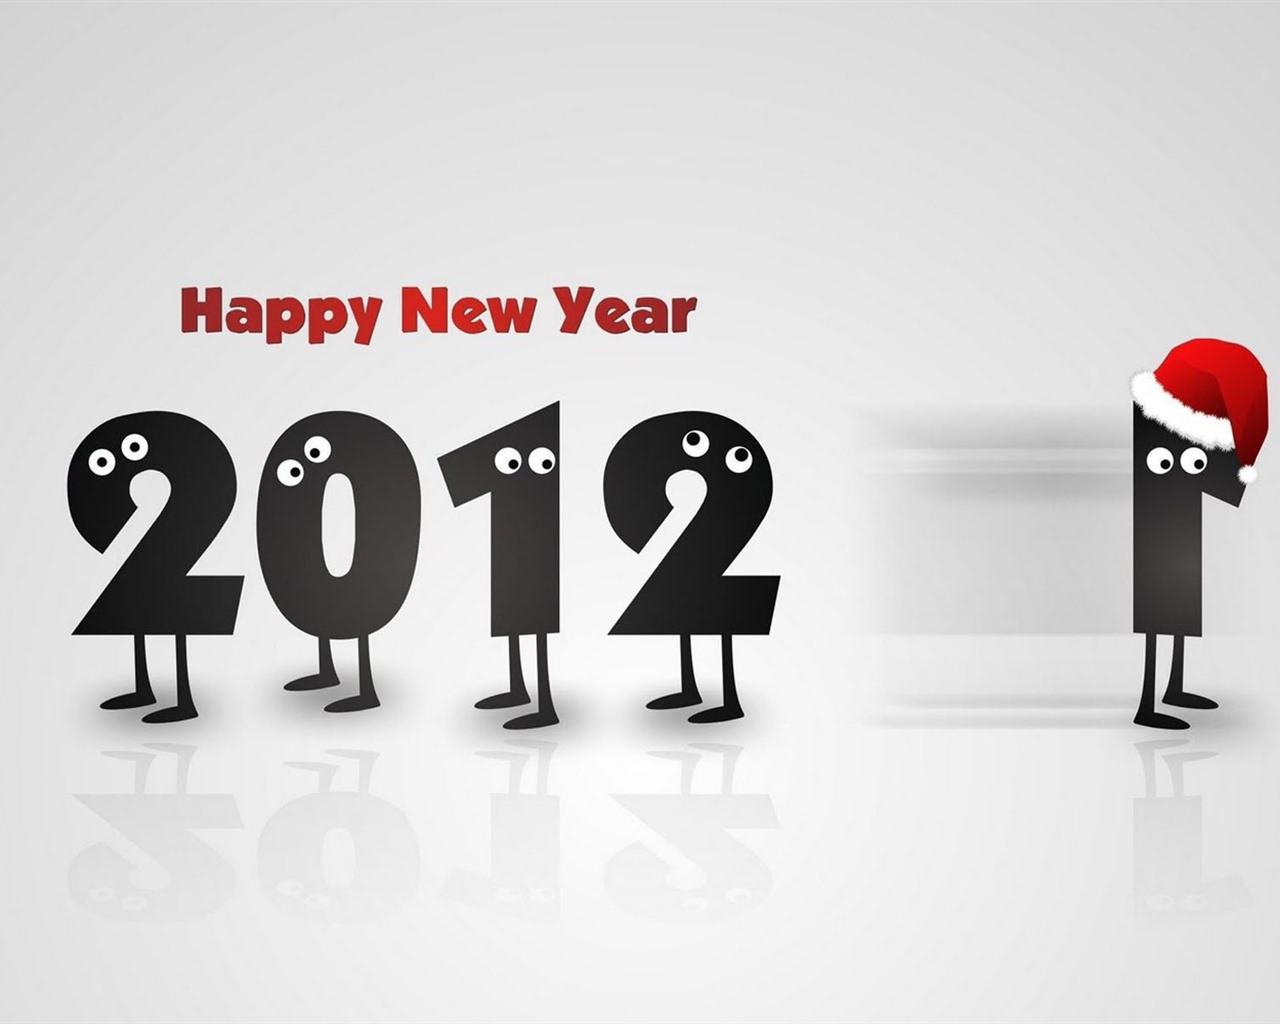 2012 New Year wallpapers (2) #19 - 1280x1024